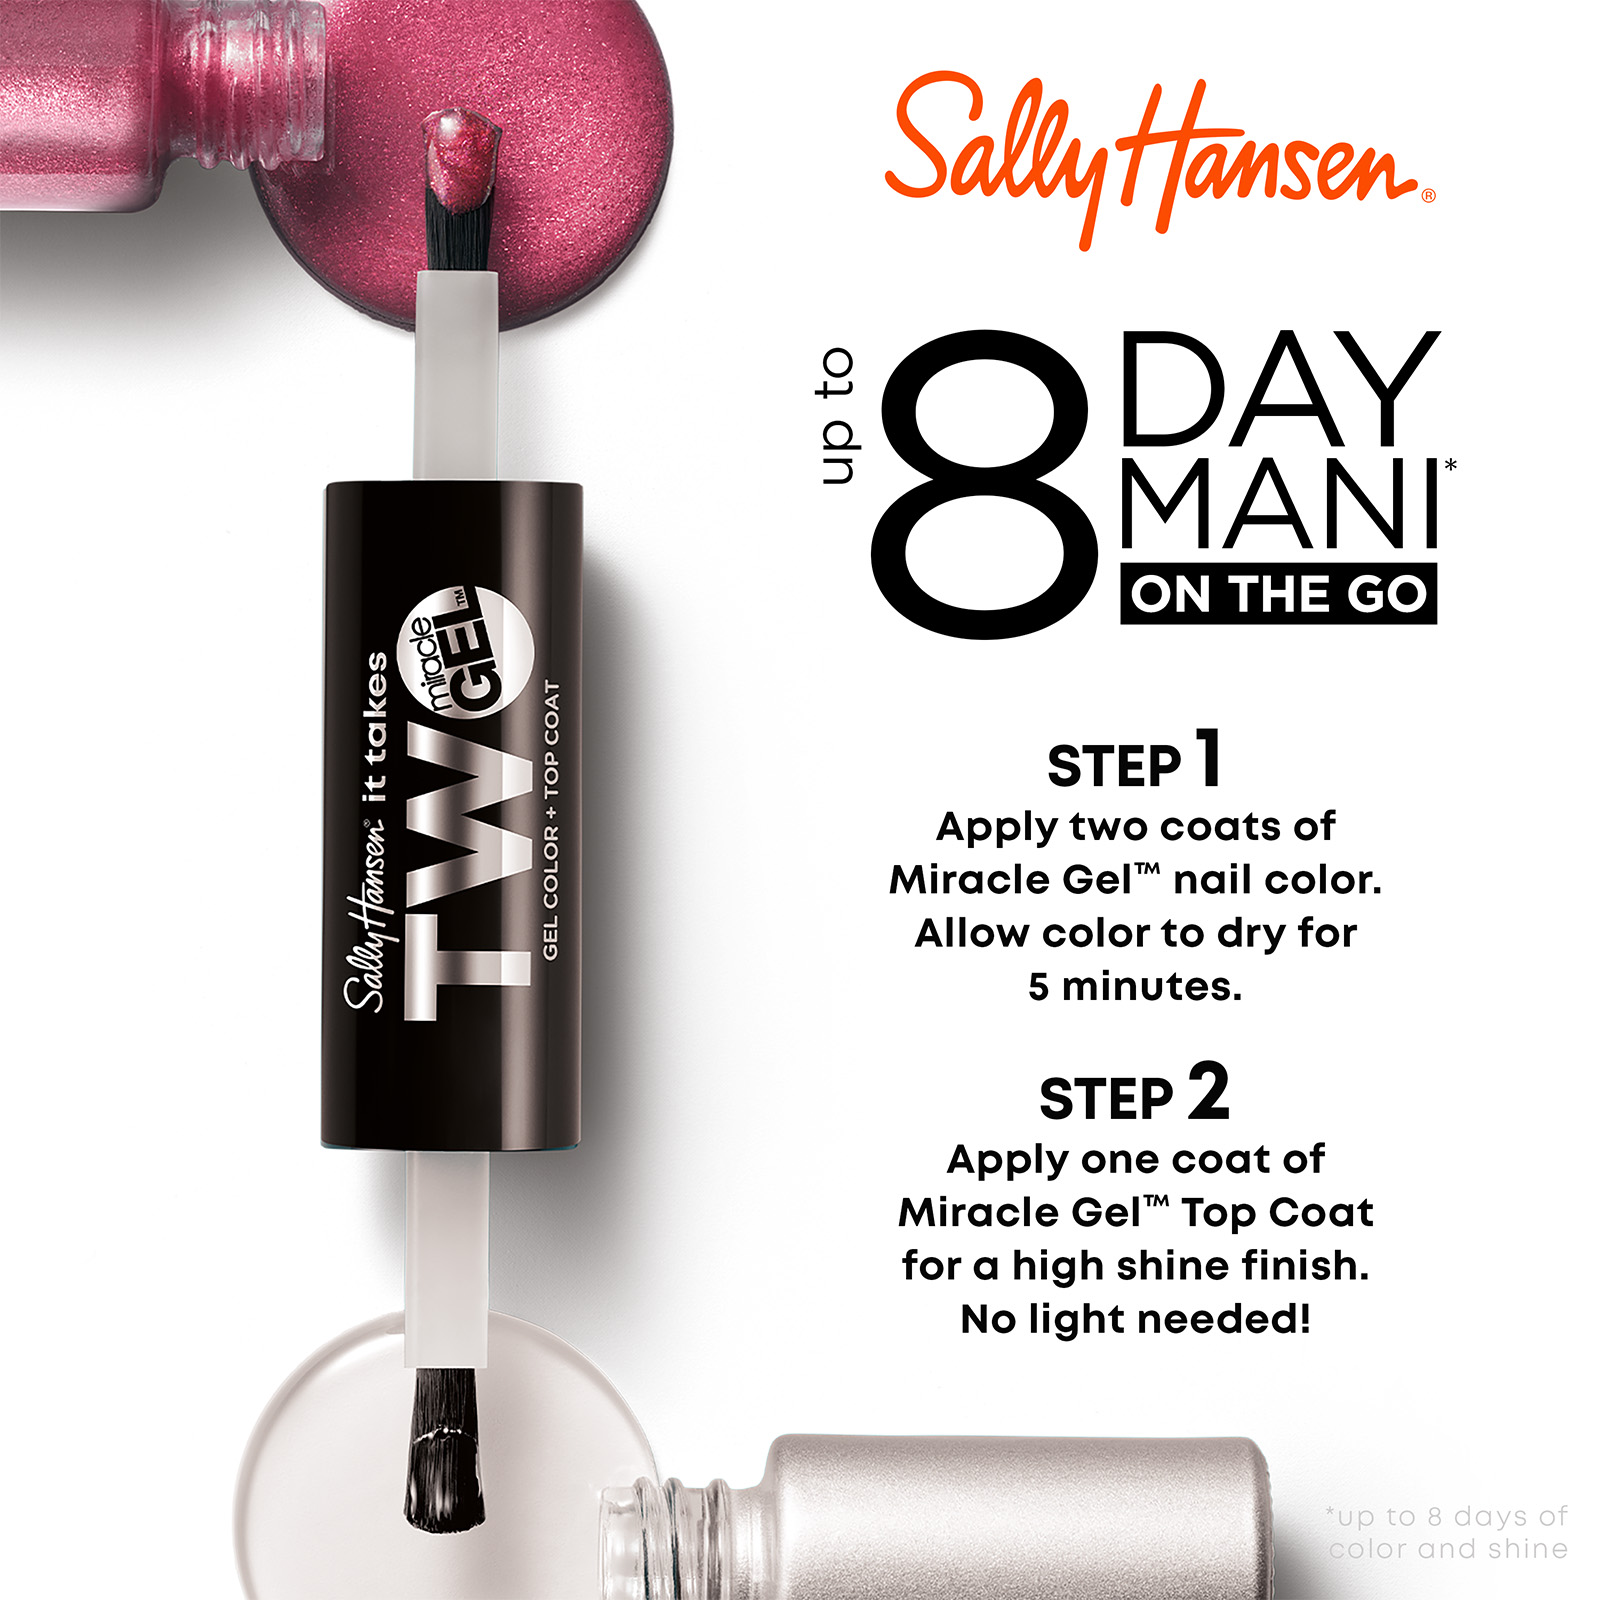 Up to 8 day mani on the go, Step 1 apply two coats of miracle gel nail color, allow color to dry for 5 minutes. Step 2 apply onee coat of miracle gel top coat for a high shine finish. No light needed